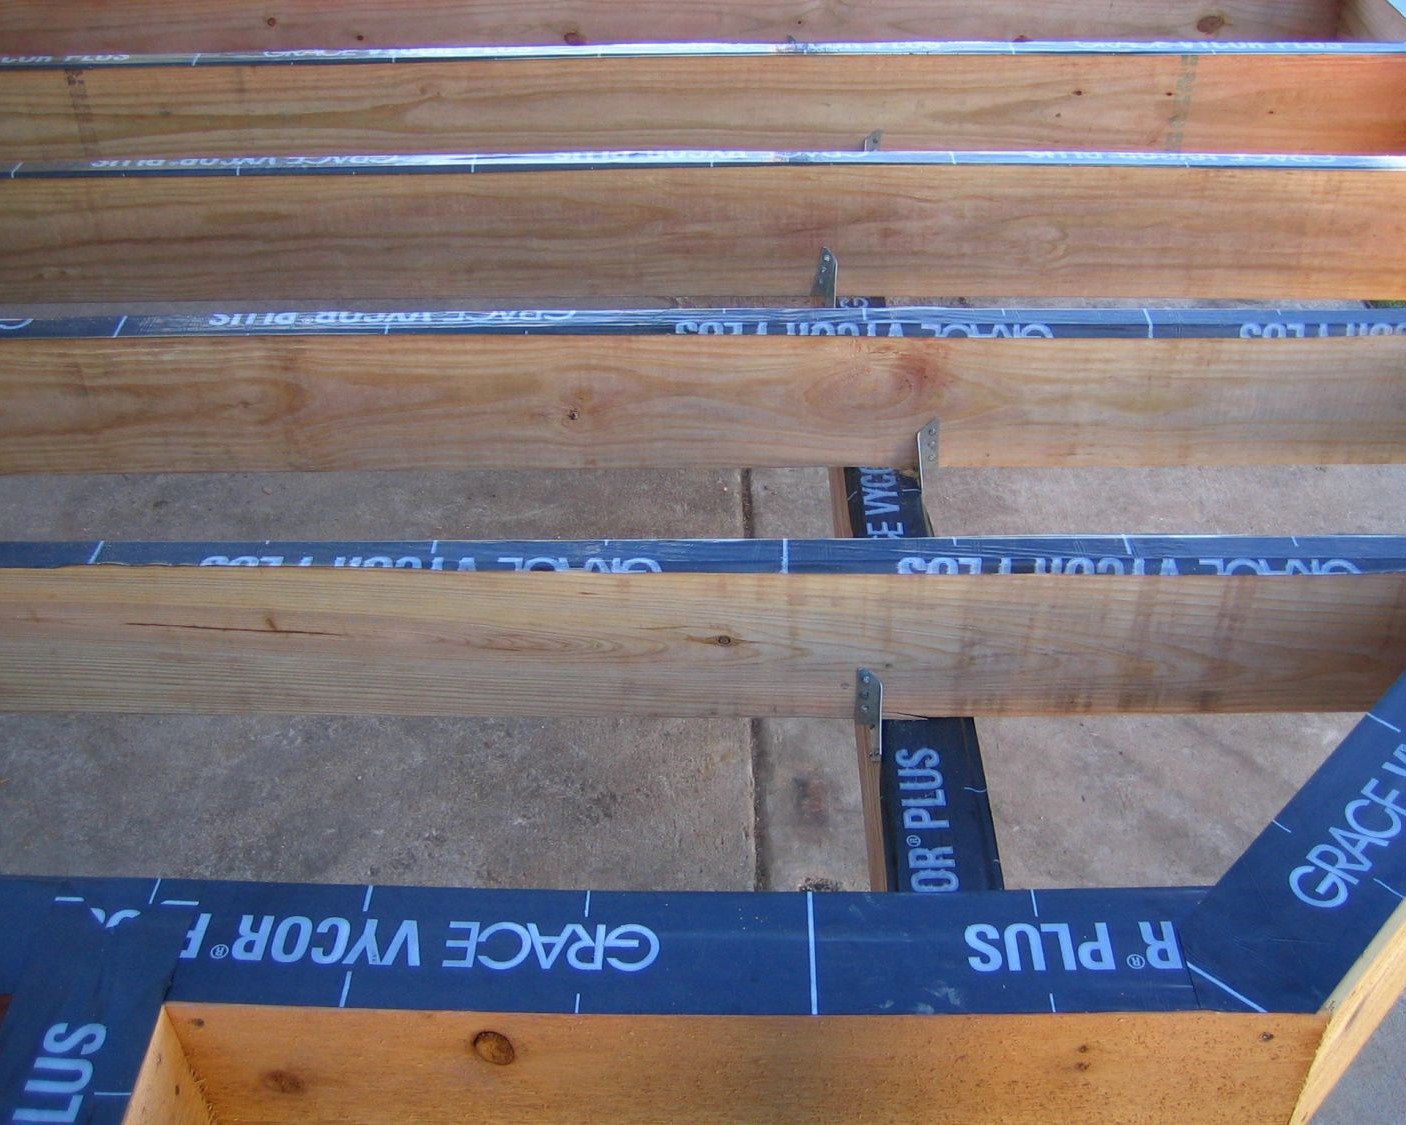 Joist protector tape installed on wood deck frame to prevent water damage.